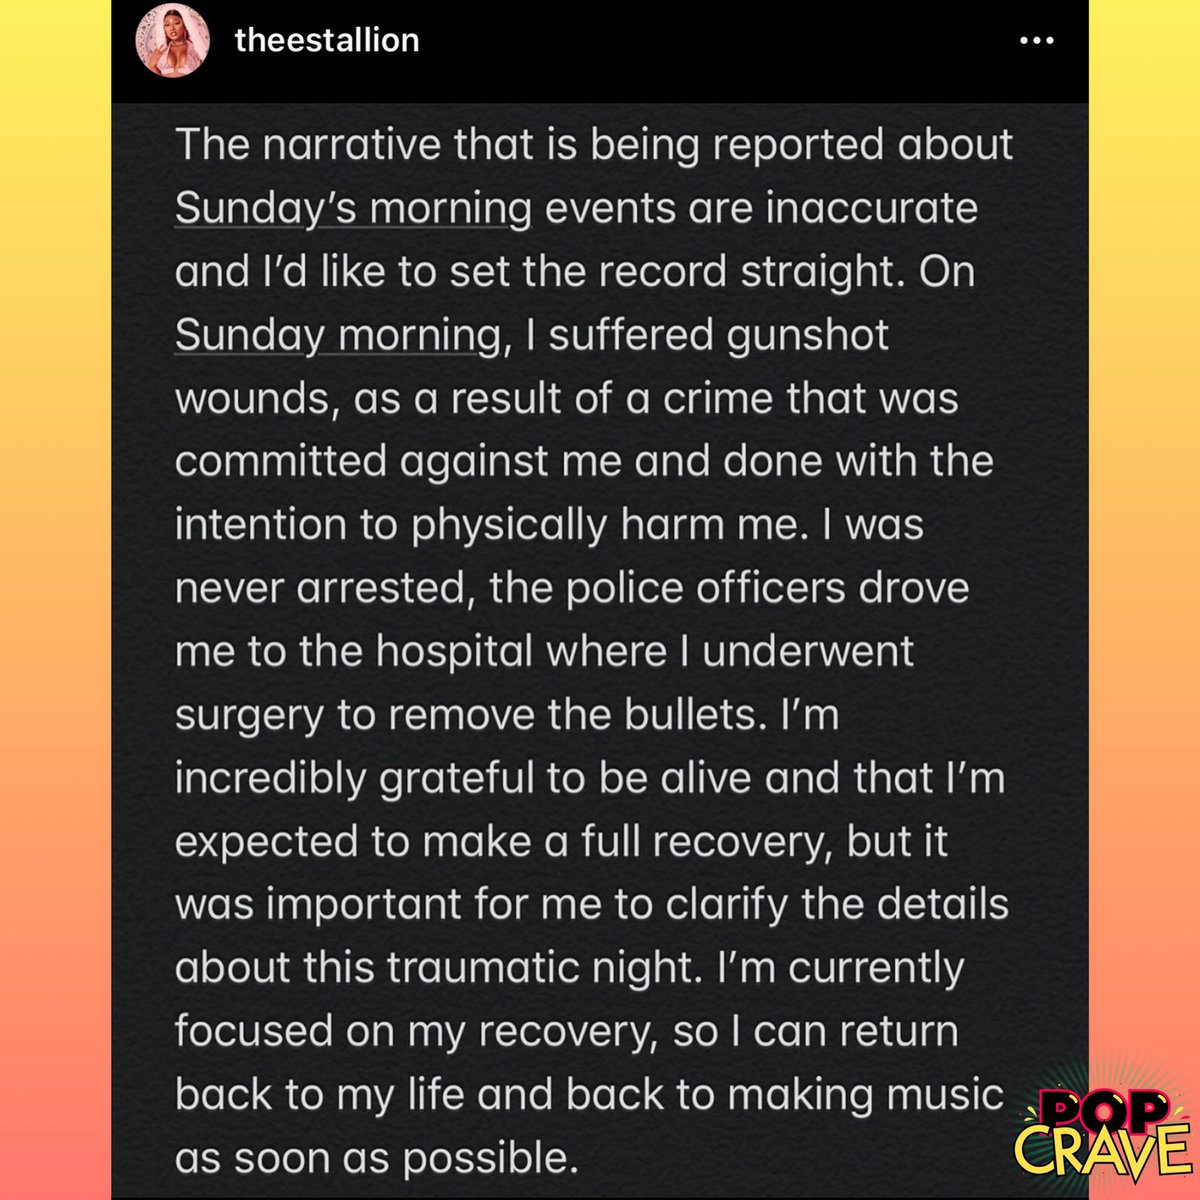 Megan Thee Stallion reveals what happened the night Tory Lanez was arrested for gun charges, explains she was shot in the foot:"The police officers drove me to the hospital where I underwent surgery to remove the bullets. I'm incredibly grateful to be alive"